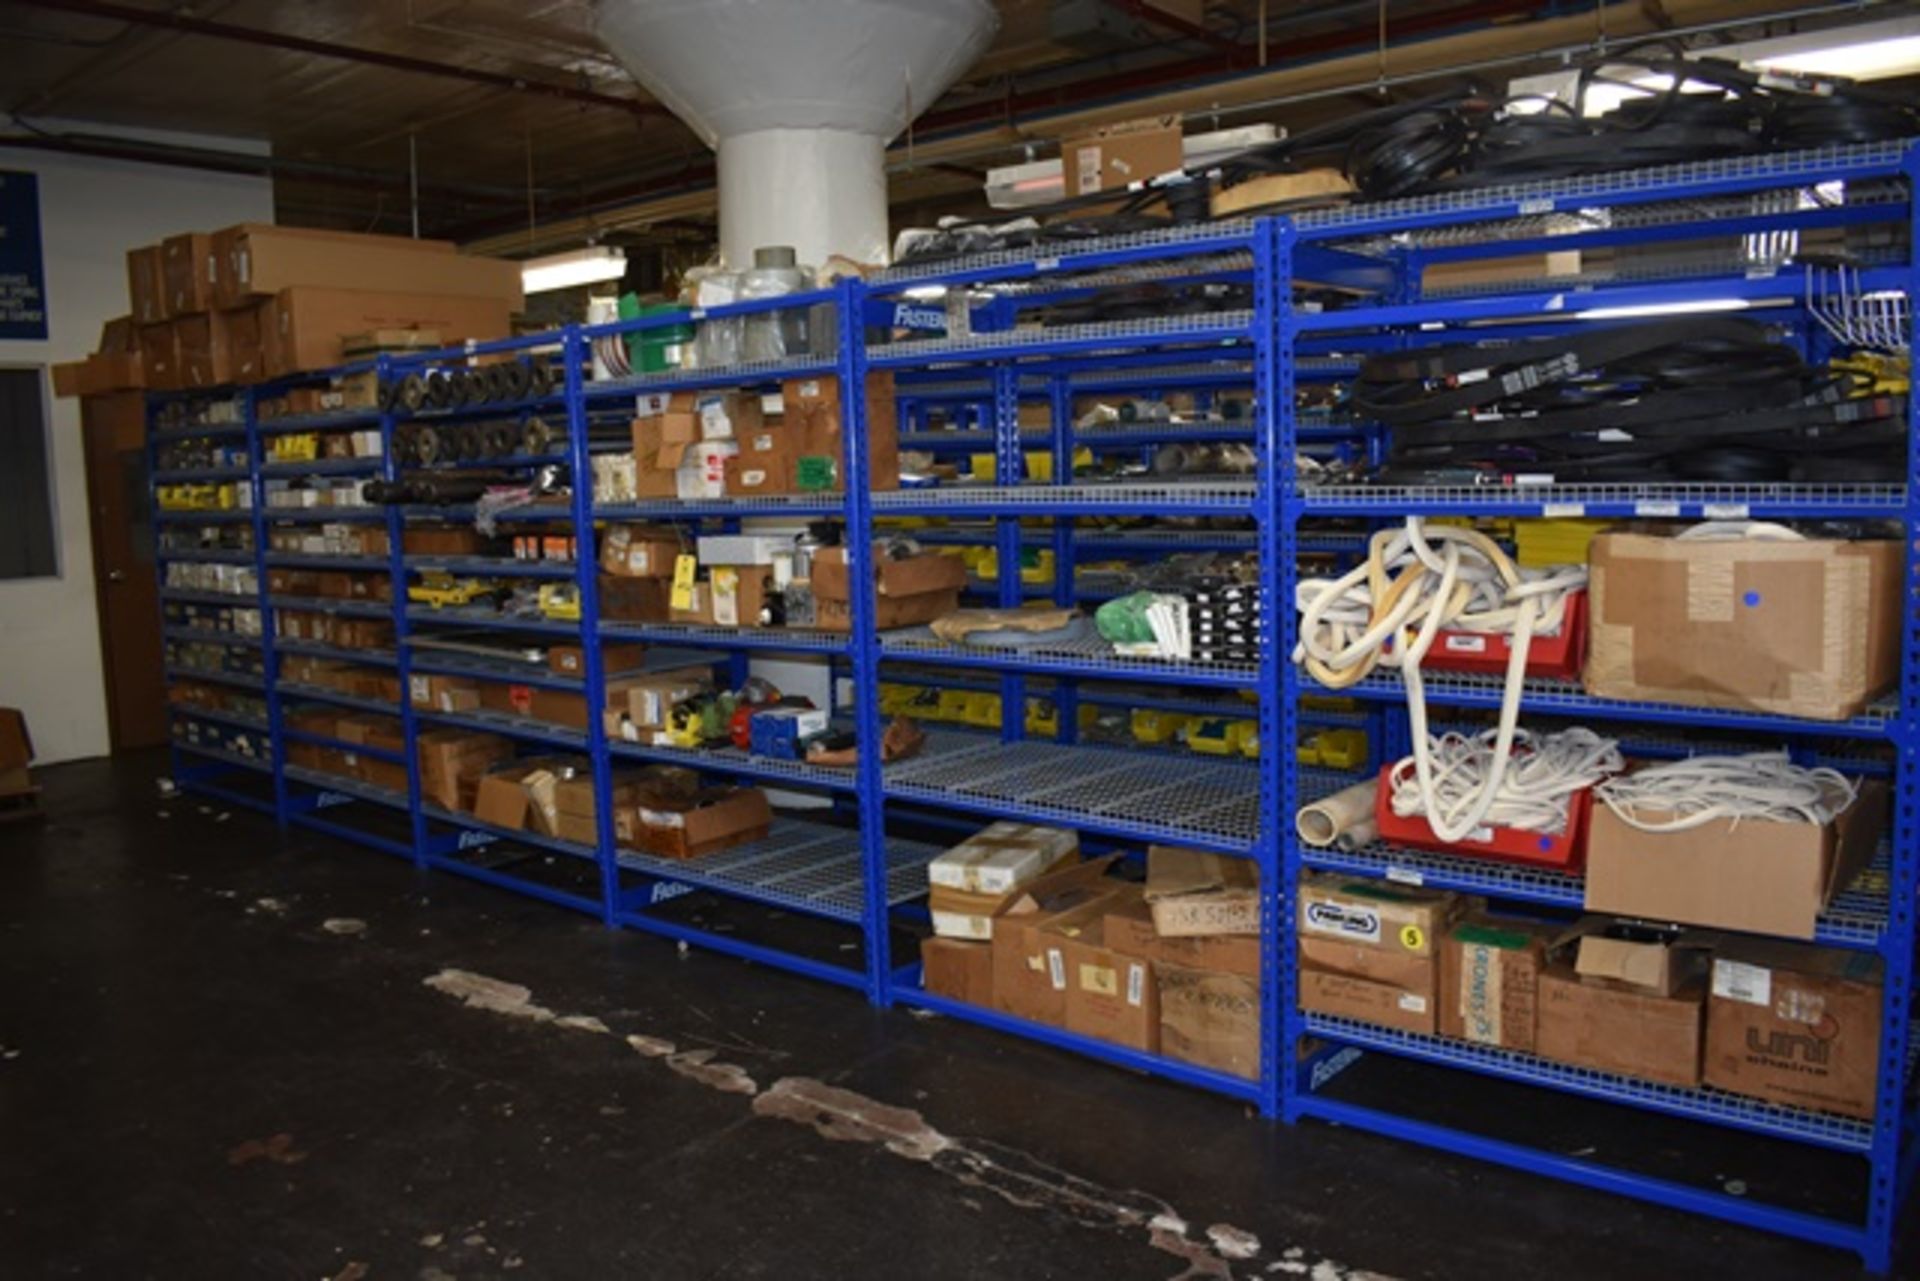 Contents of Blue Fastenal shelving including: V-belts, carlock, conveyor parts, etc. Five rows of